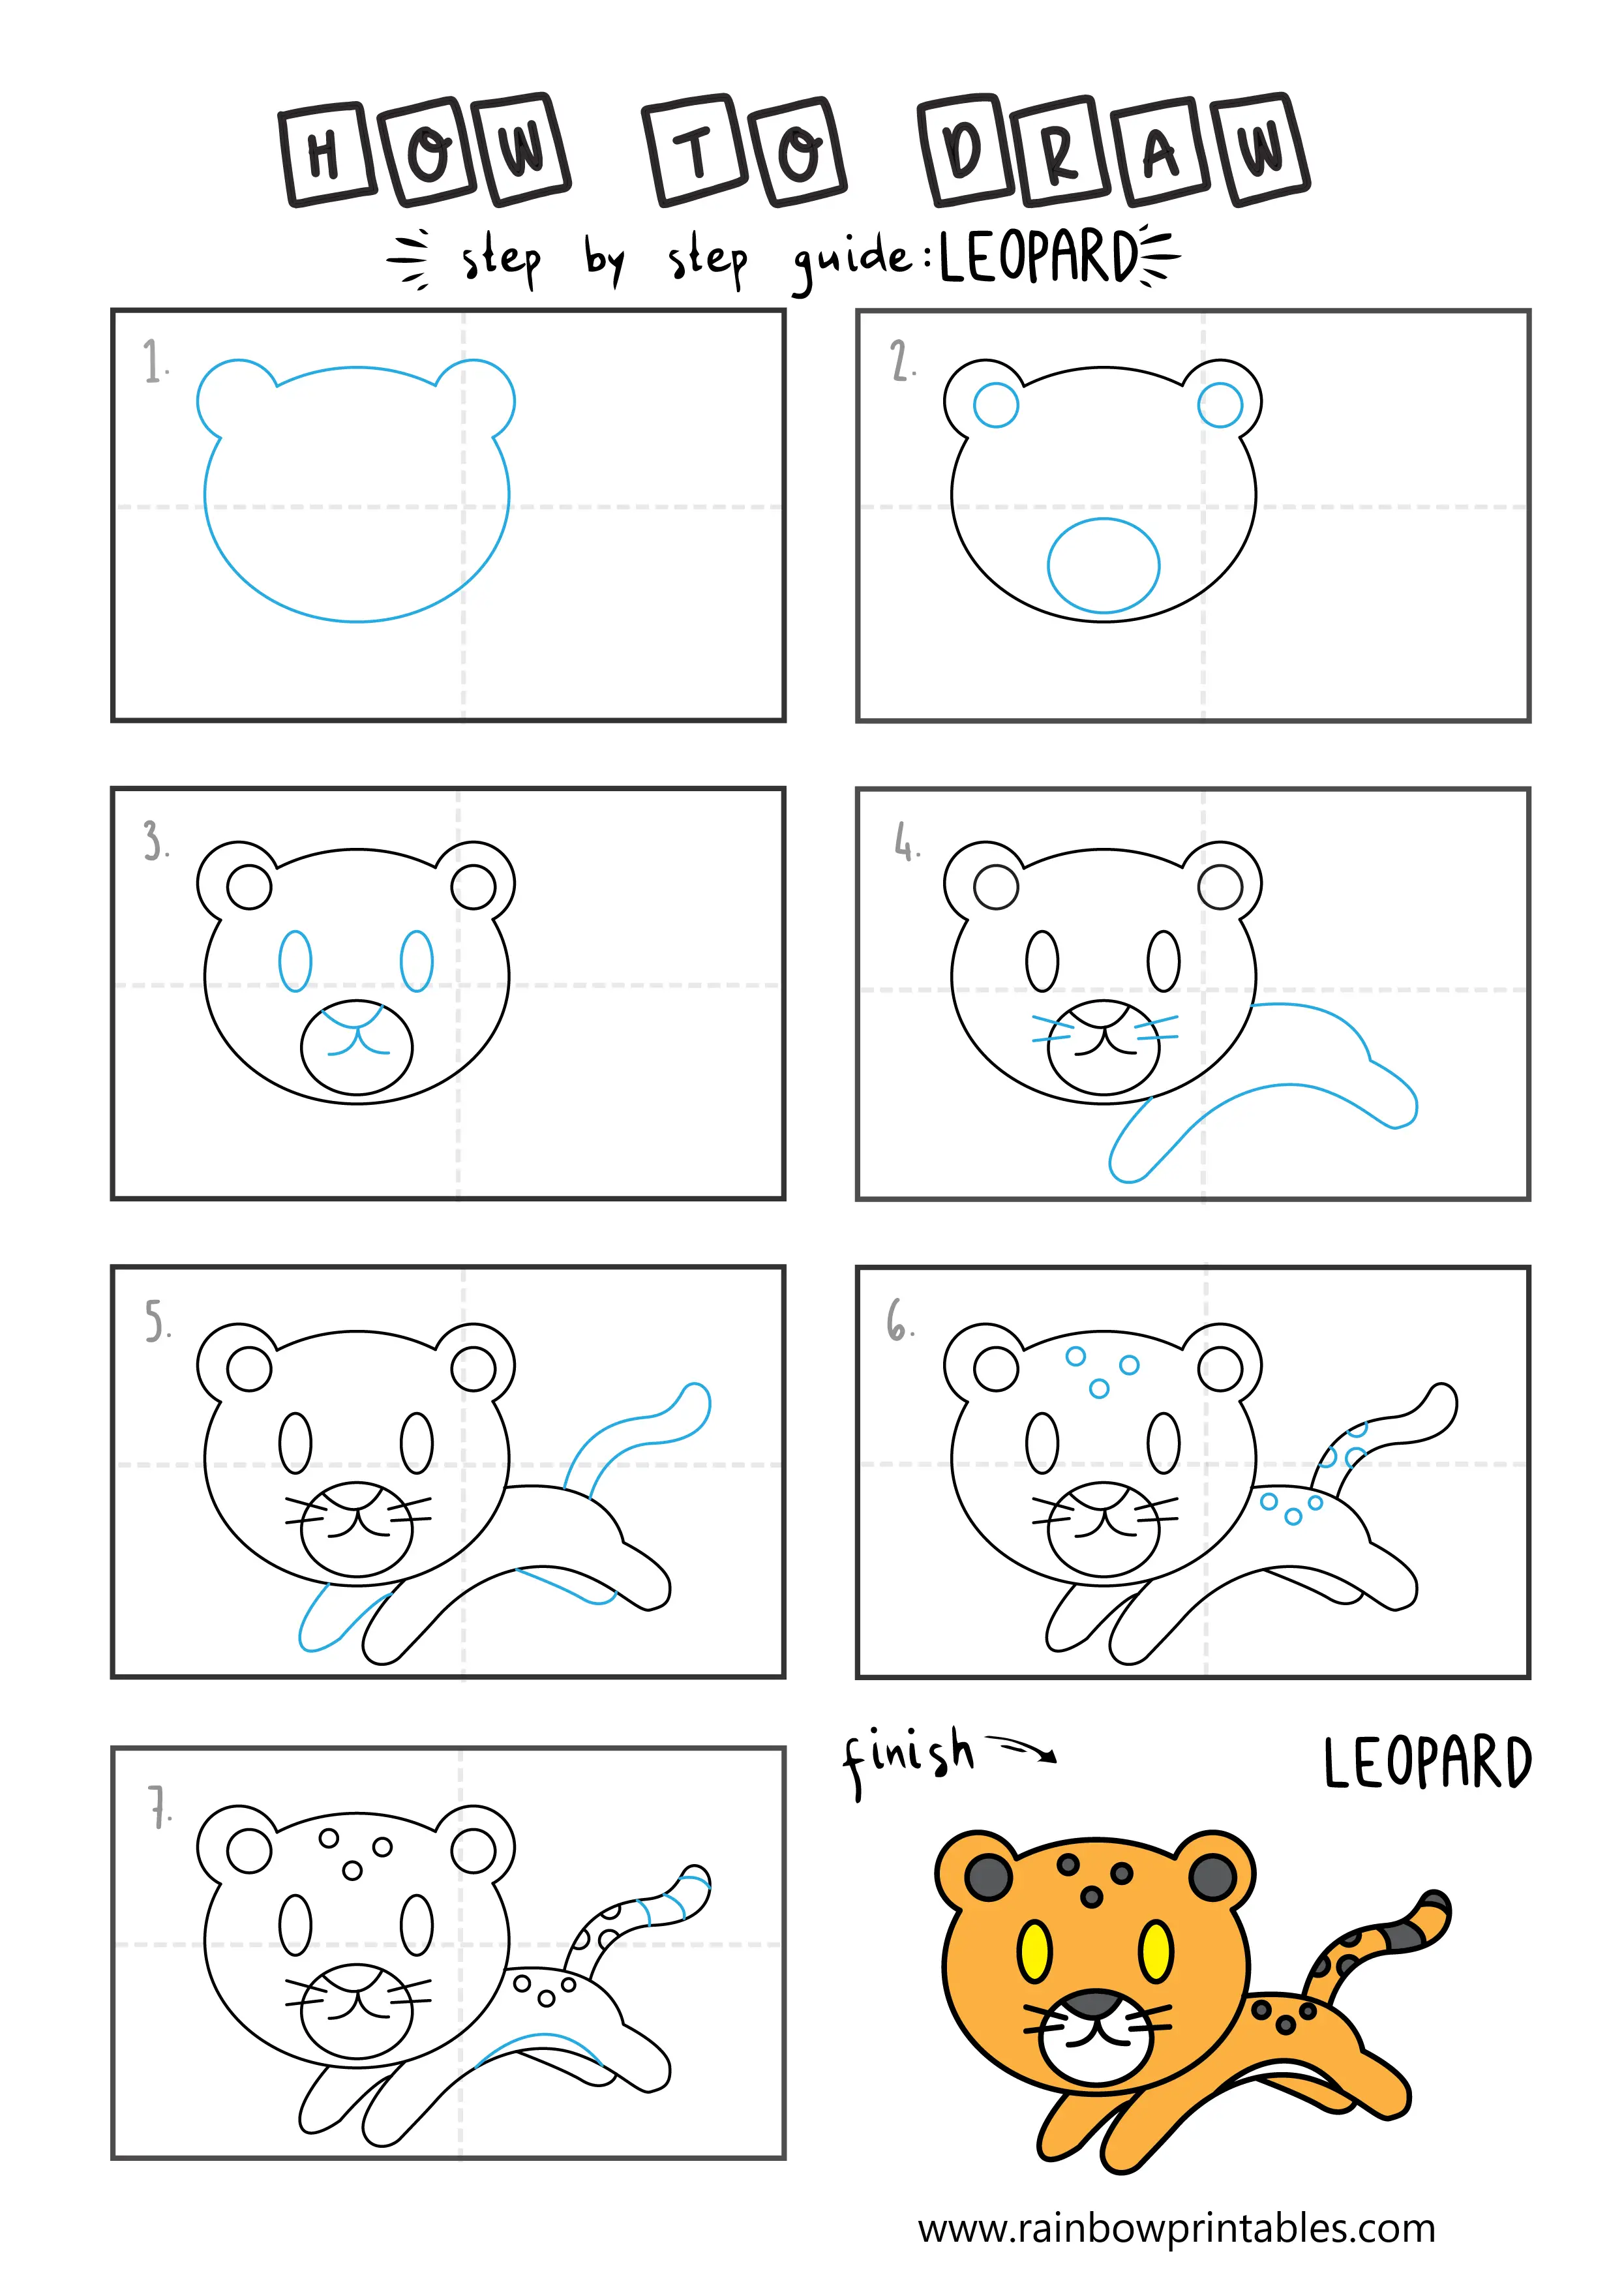 How To Draw a LEOPARD Easy Step By Step For Kids Illustration Art Ideas